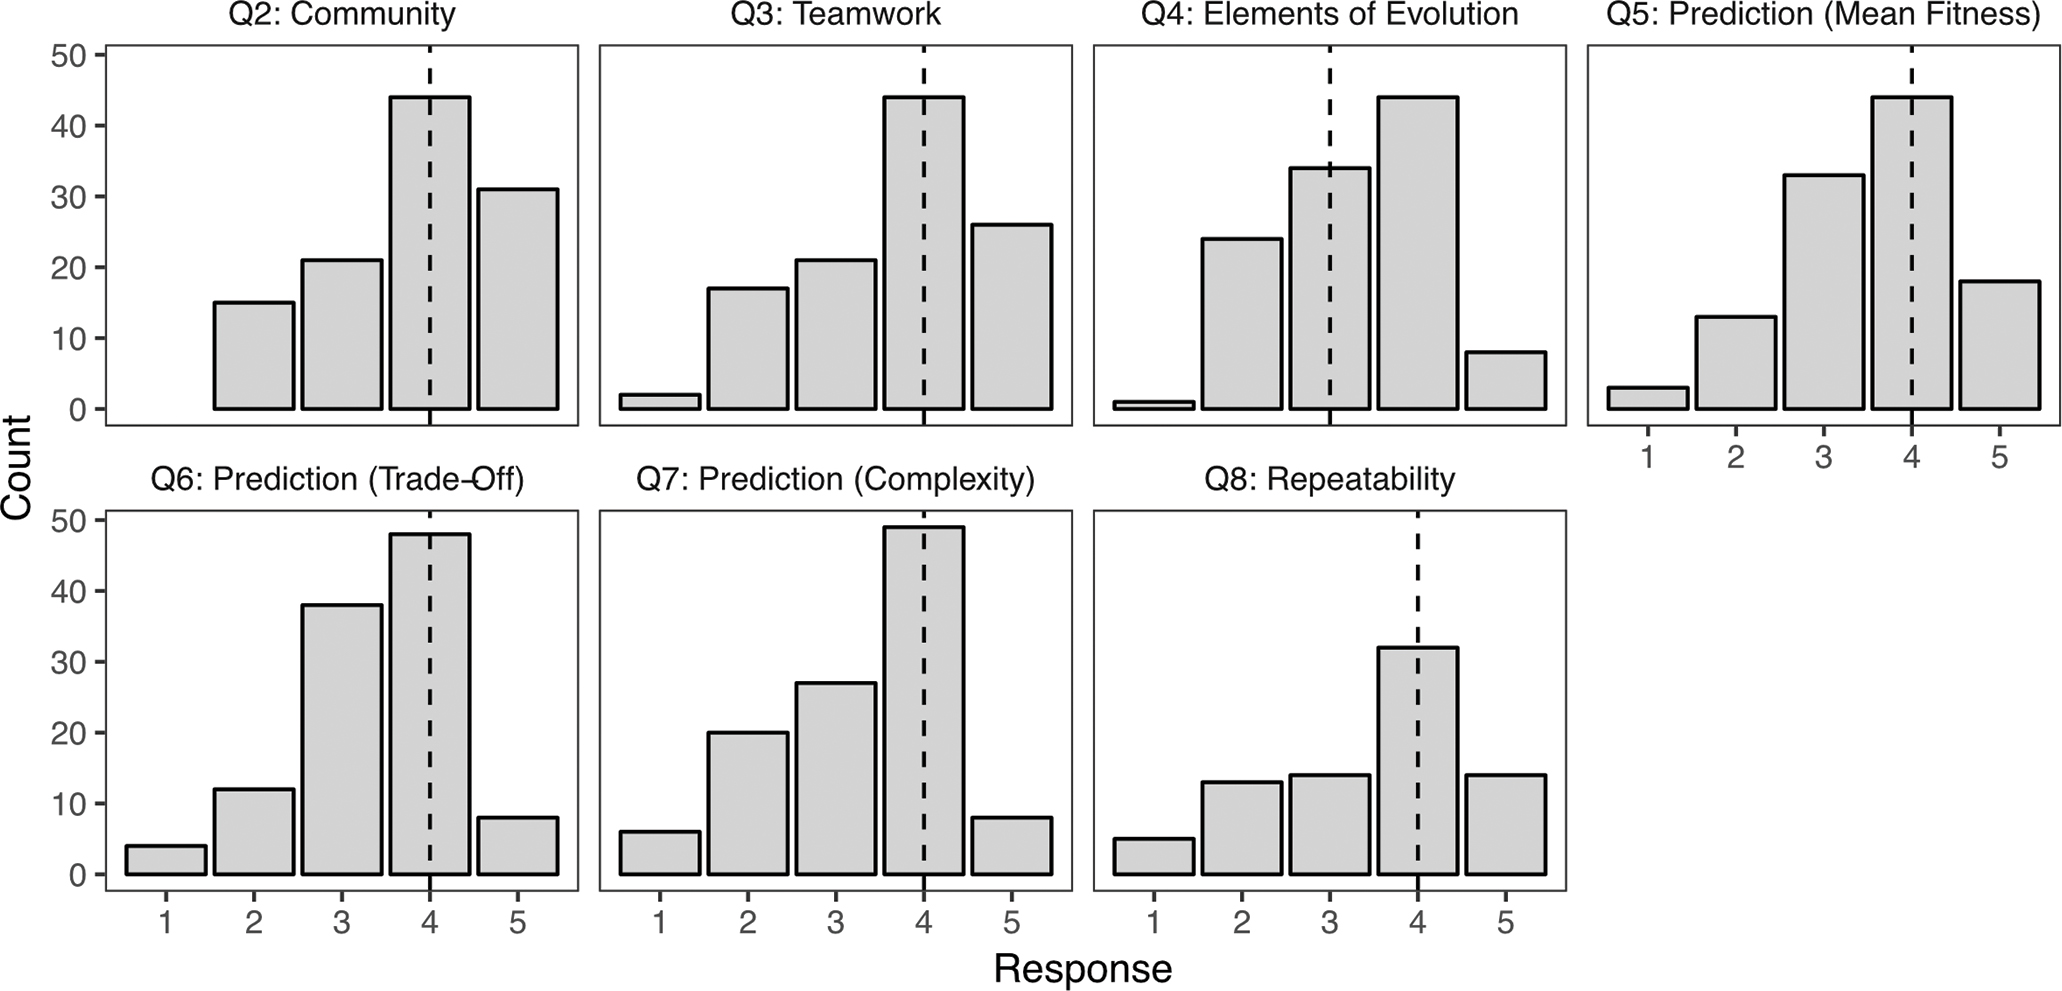 Student Assessment of Learning Gains quiz responses. Panels refer to survey questions from <a class="table" href="#JCST_06_T2">Table 2</a>. Responses are: <i>no gain</i> (1), <i>a little gain</i> (2), <i>moderate gain</i> (3), <i>good gain</i> (4), <i>gre